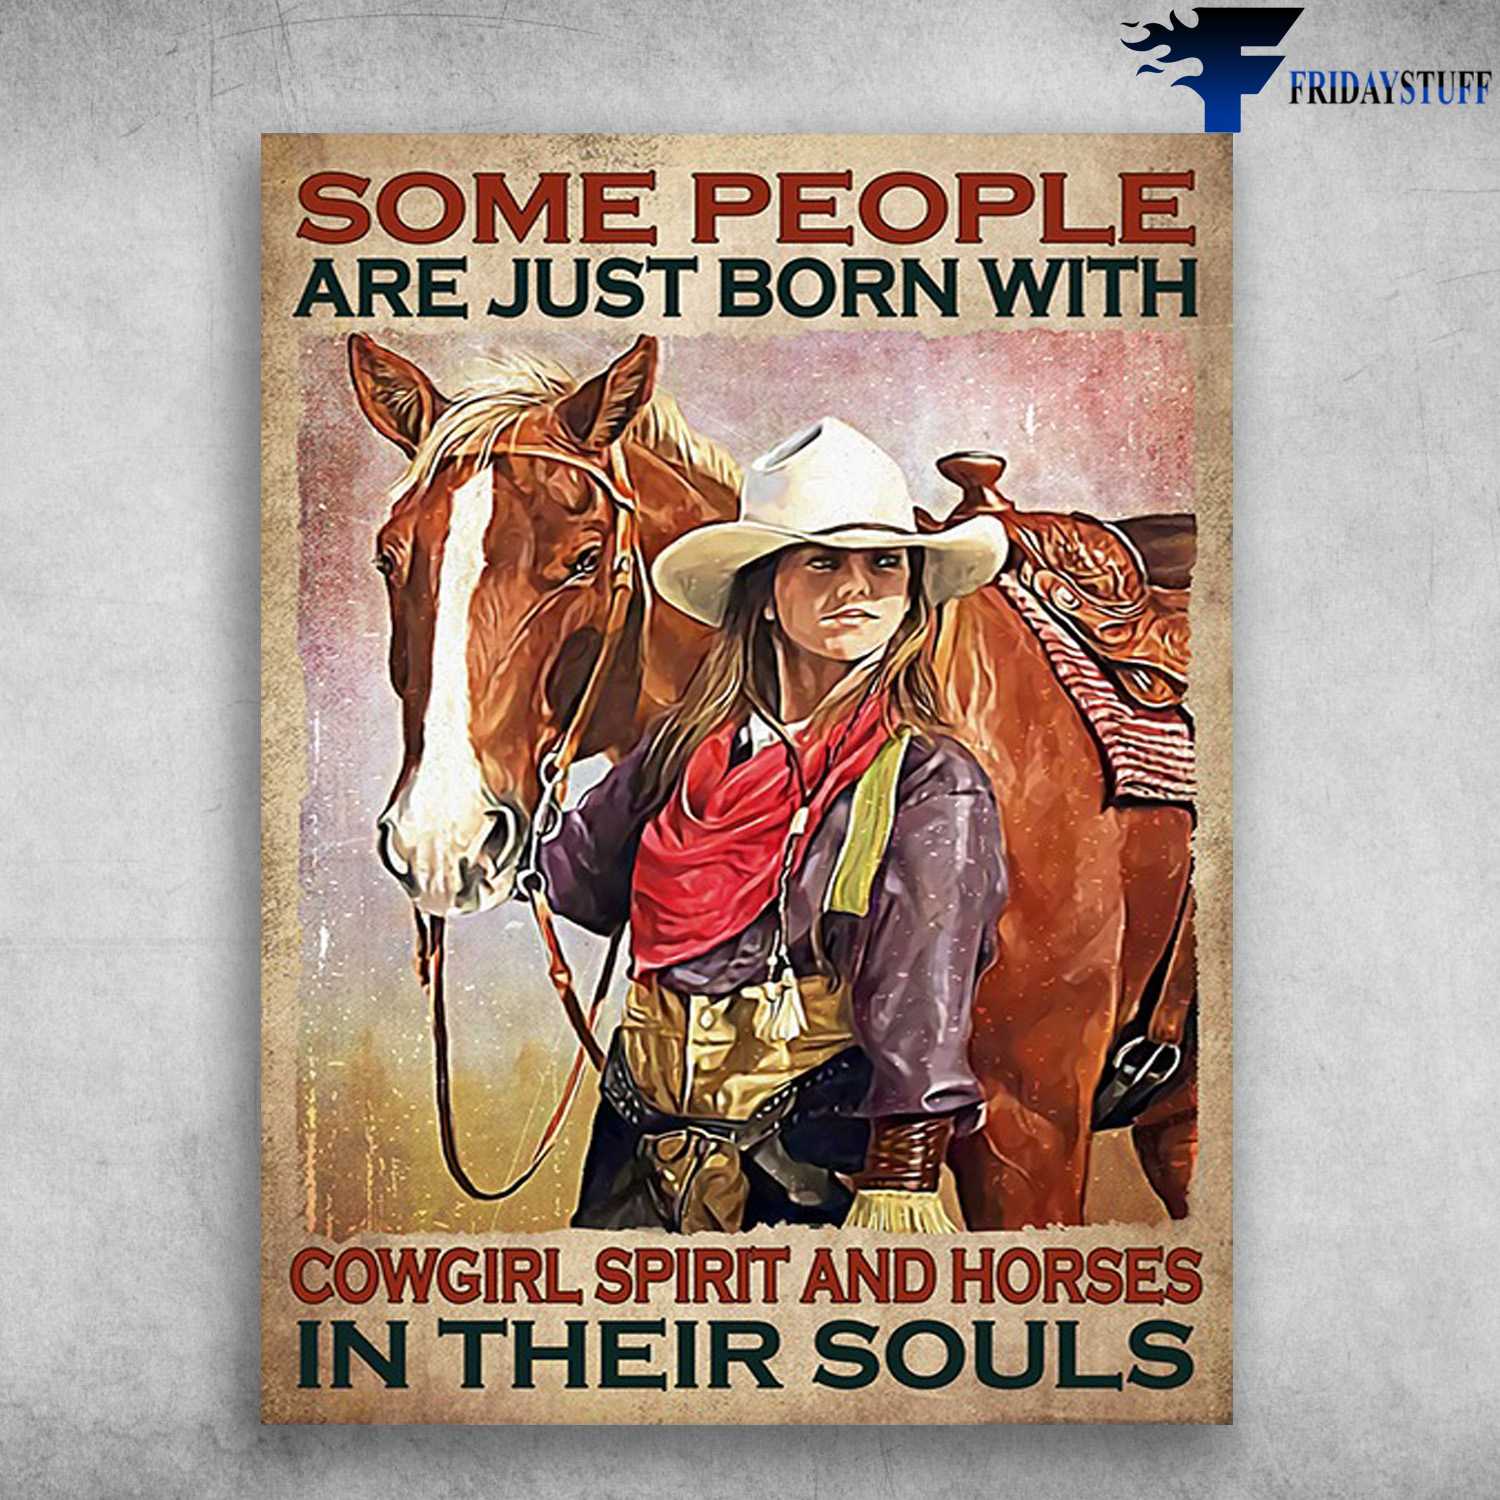 Cowgir And Horse, Horse Lover - Somepeople Are Just Born With, Cowgirl Spirit And Horses, In Their Souls